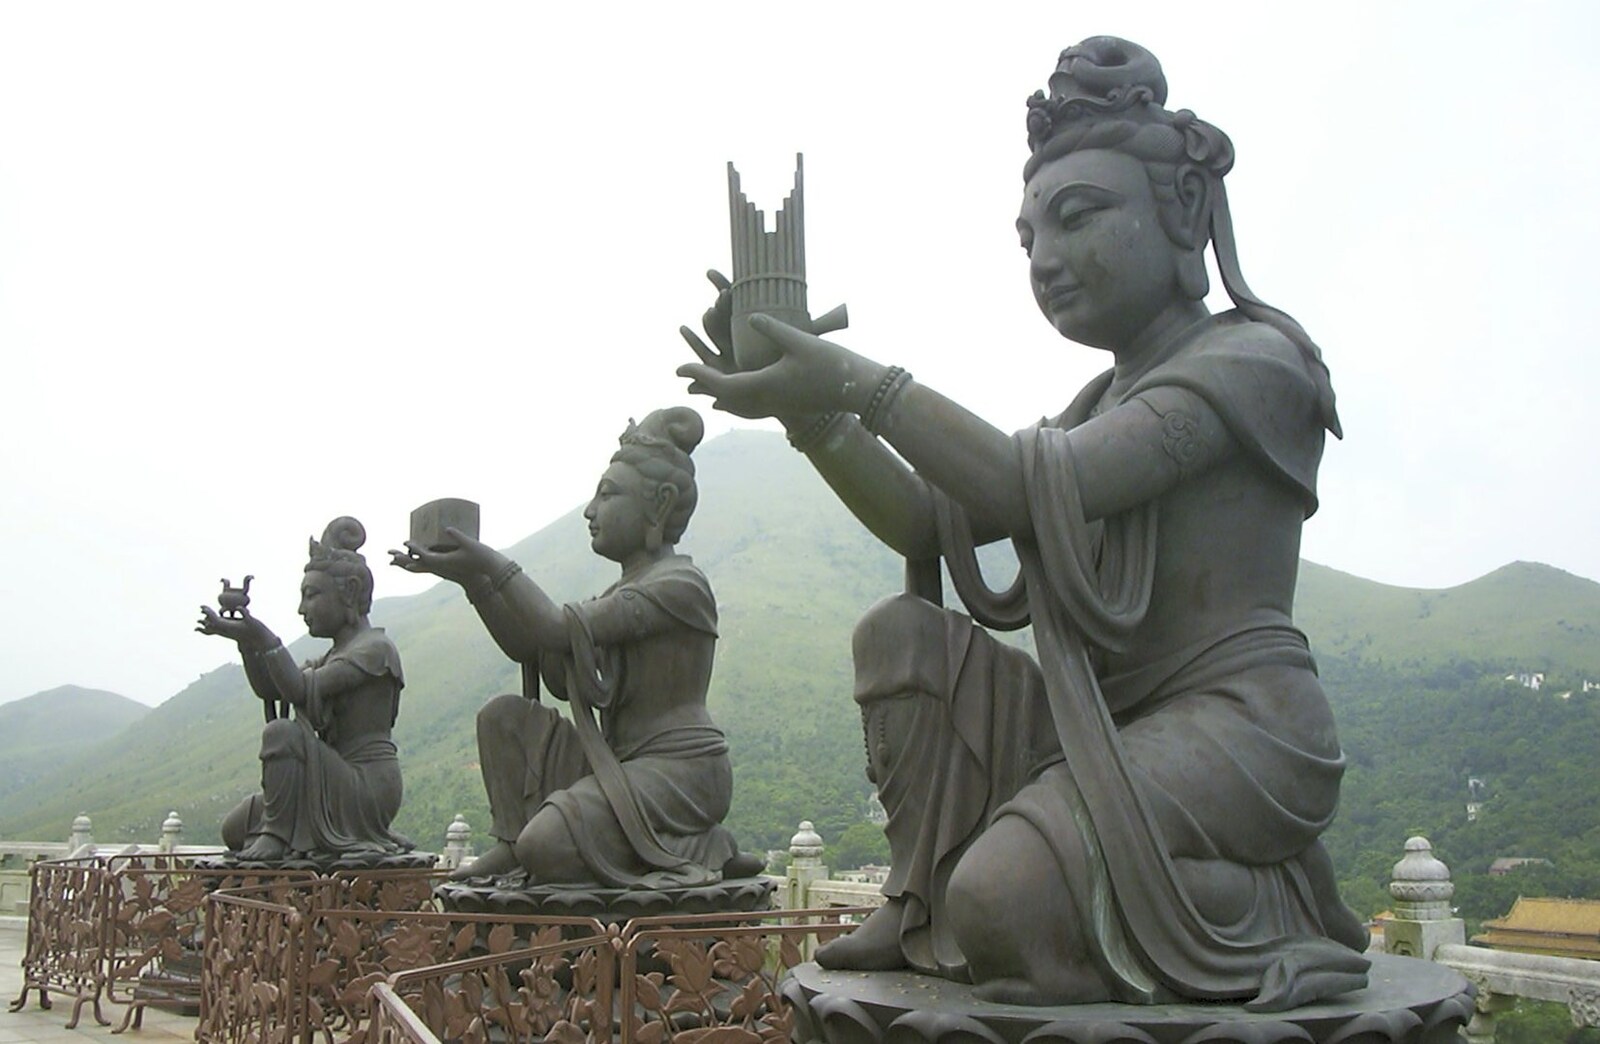 Lantau Island and the Po Lin Monastery, Hong Kong, China - 14th August 2001: The statues make offerings to Buddha